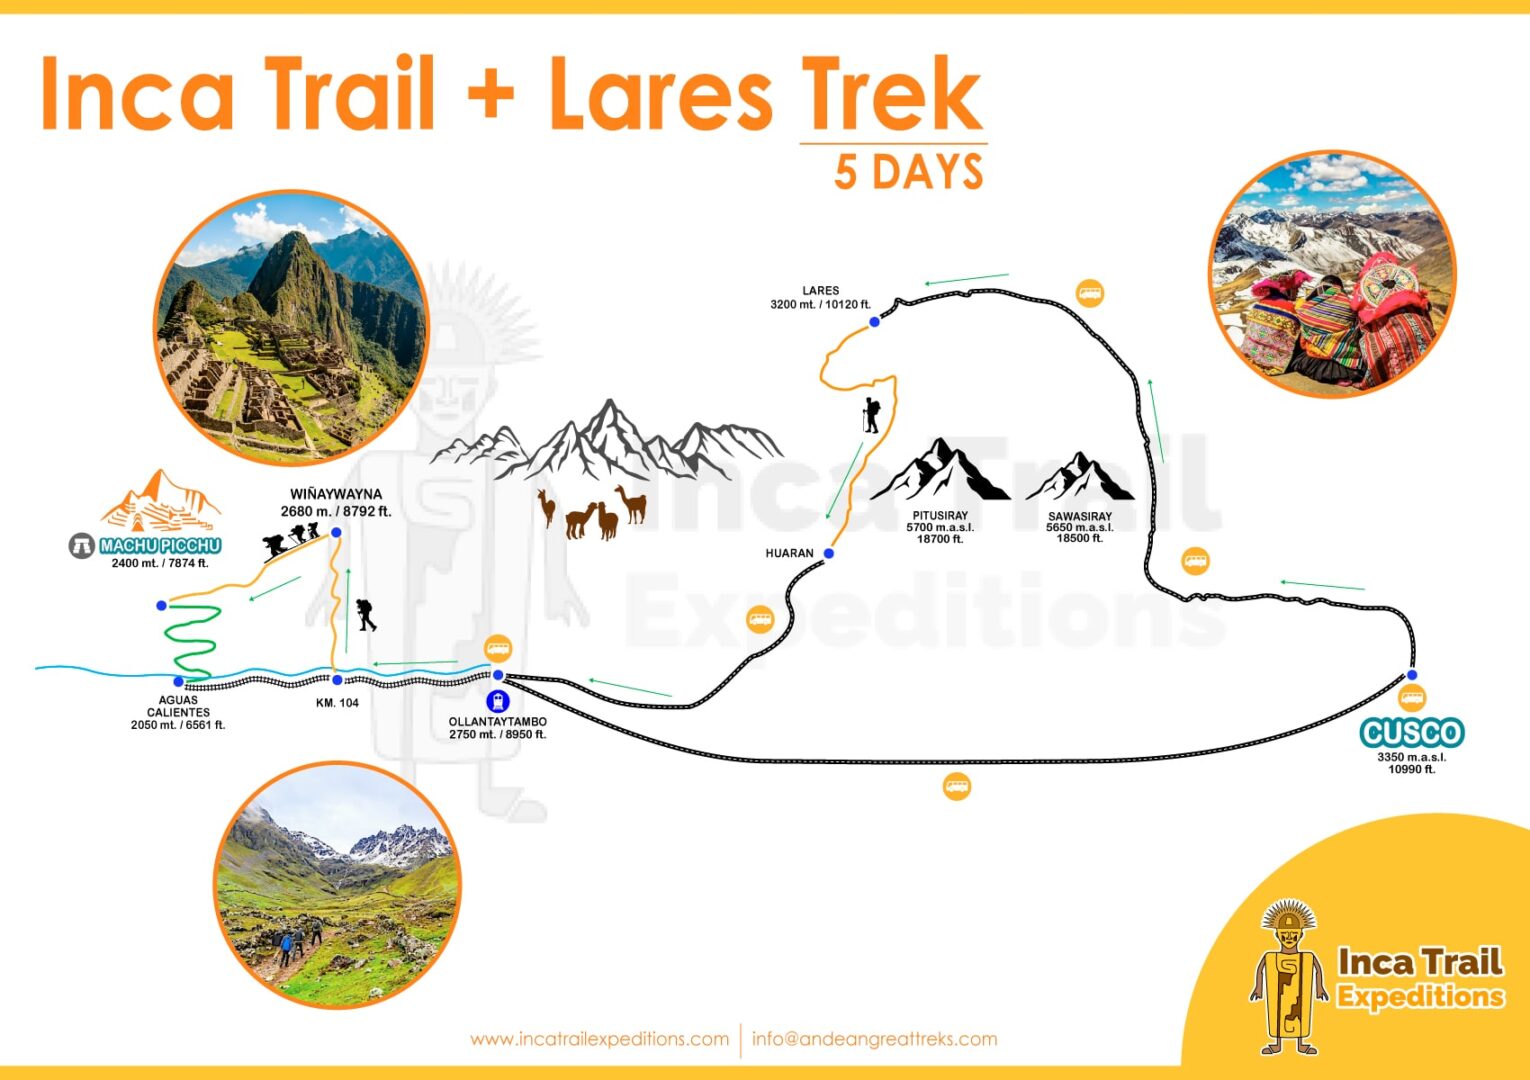 INCA-TRAIL-LARES-TREK-5-DAYS-BY-INCA-TRAIL-EXPEDITIONS